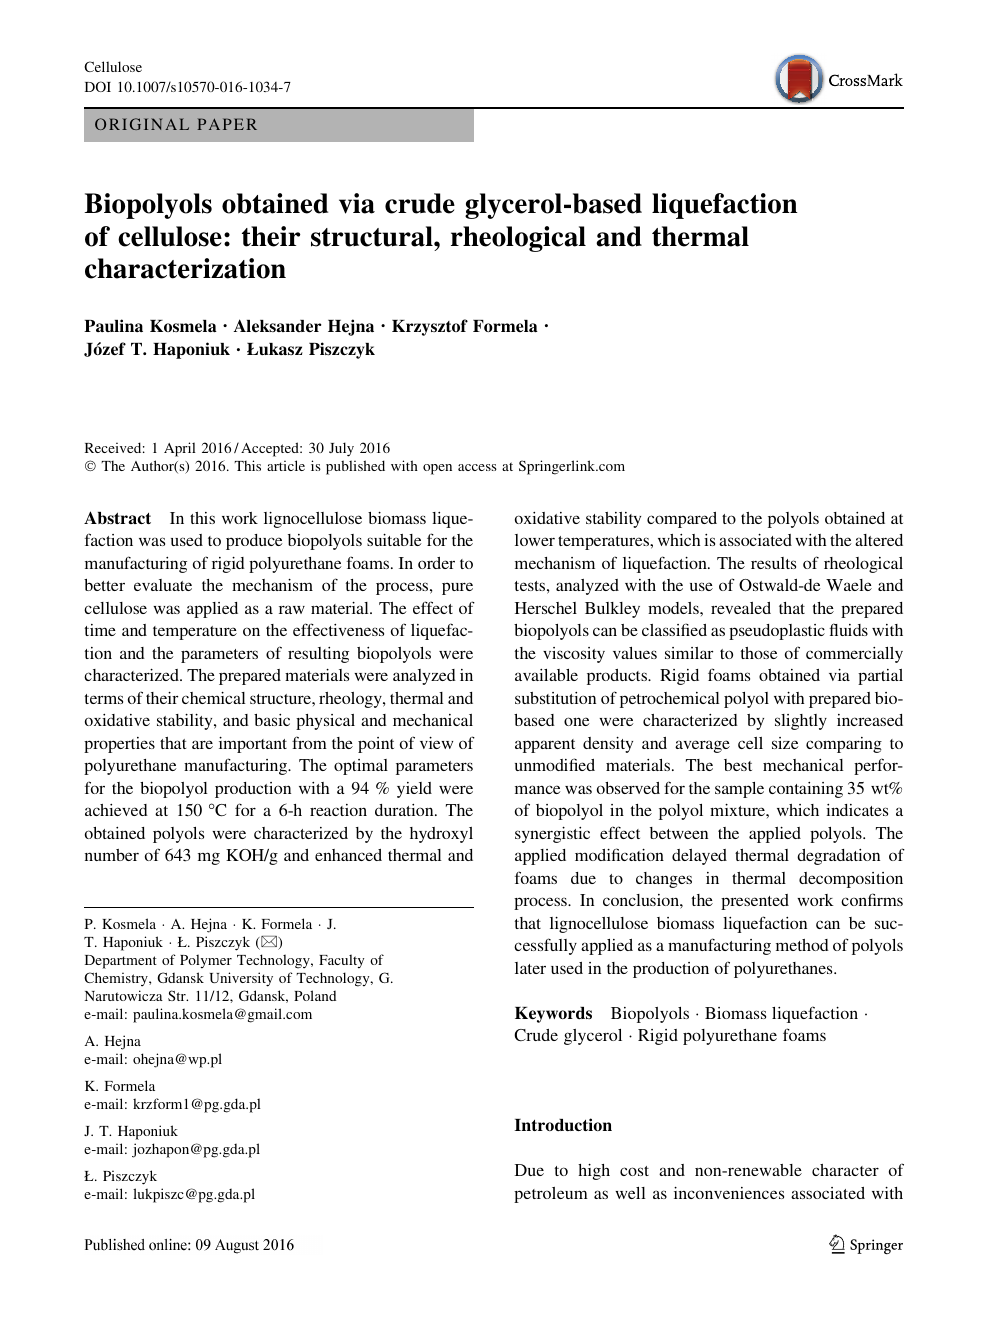 Biopolyols Obtained Via Crude Glycerol Based Liquefaction Of Cellulose Their Structural Rheological And Thermal Characterization Topic Of Research Paper In Chemical Sciences Download Scholarly Article Pdf And Read For Free On Cyberleninka